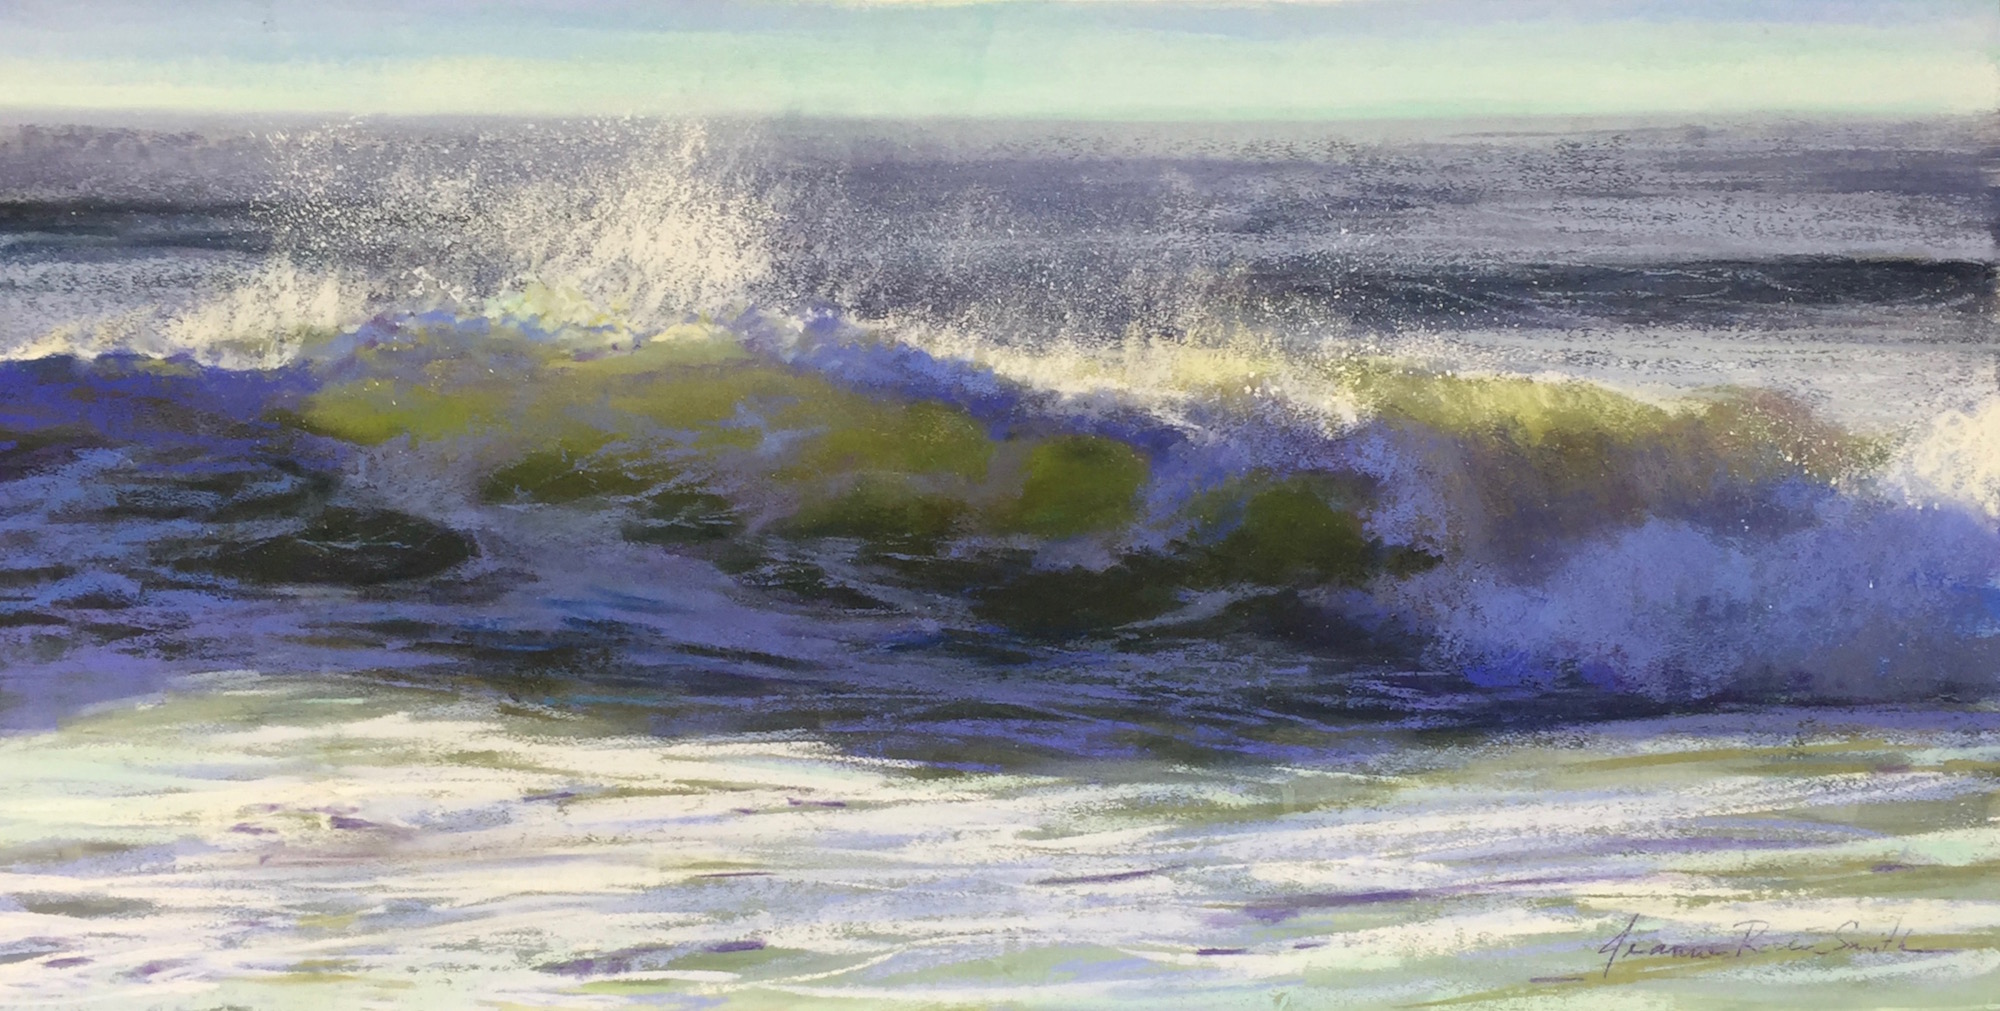 Jeanne Rosier Smith, "Before the Fall," pastel,15 x 30in. My favourite moment: when a wave is about to break, fleeting beauty in motion, caught in stillness. 